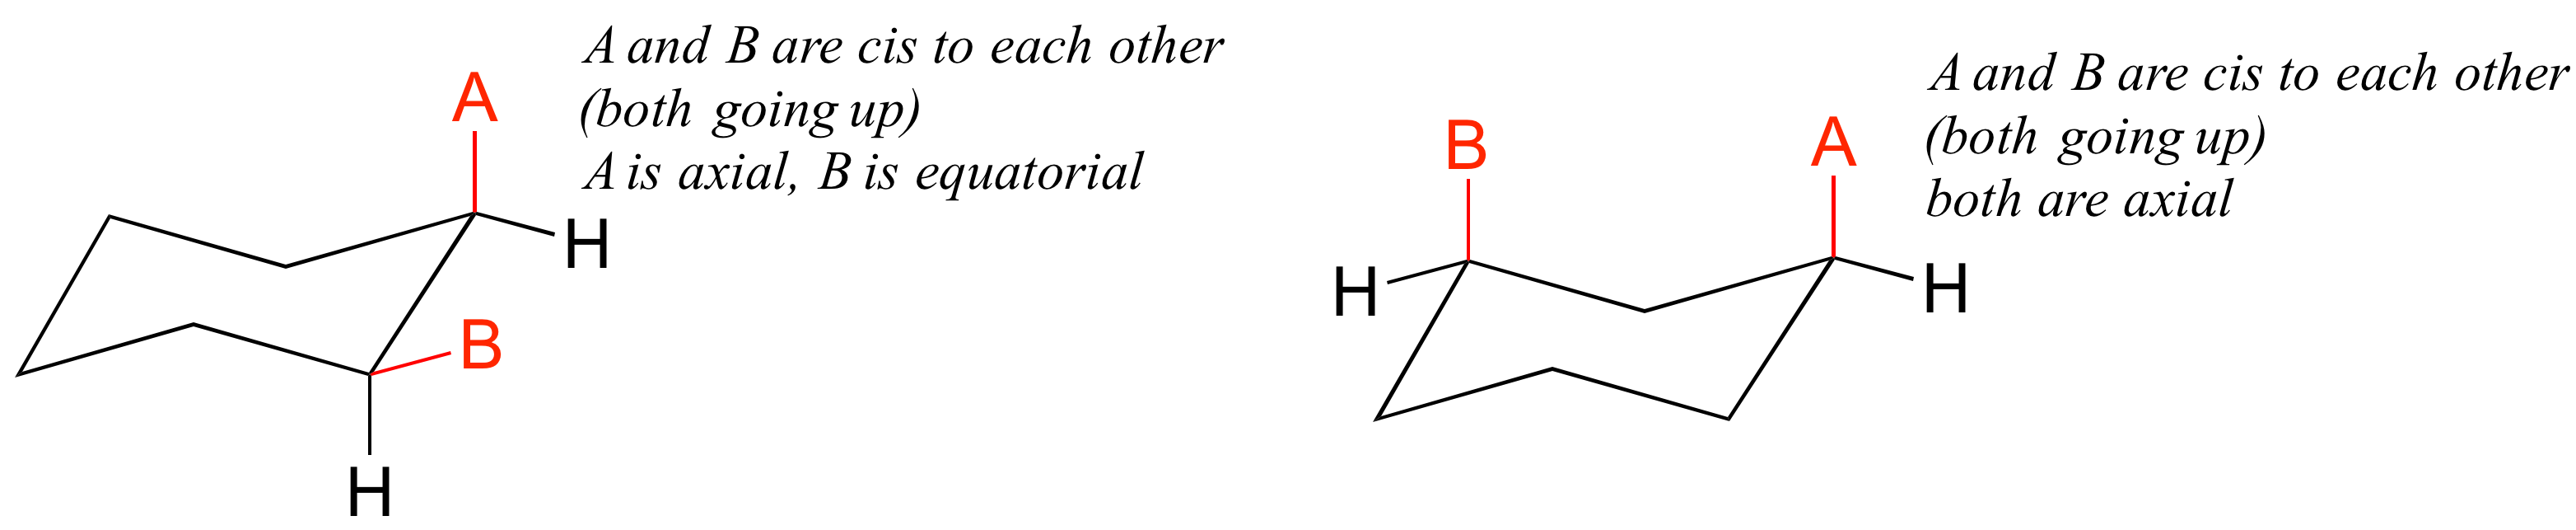 Left: A and B are cis to each other (both going up). They are one carbon away from each other. A is axial, B is equatorial. Right: A and B are cis to each other (both going up). They are two carbons away from each other. Both are axial.